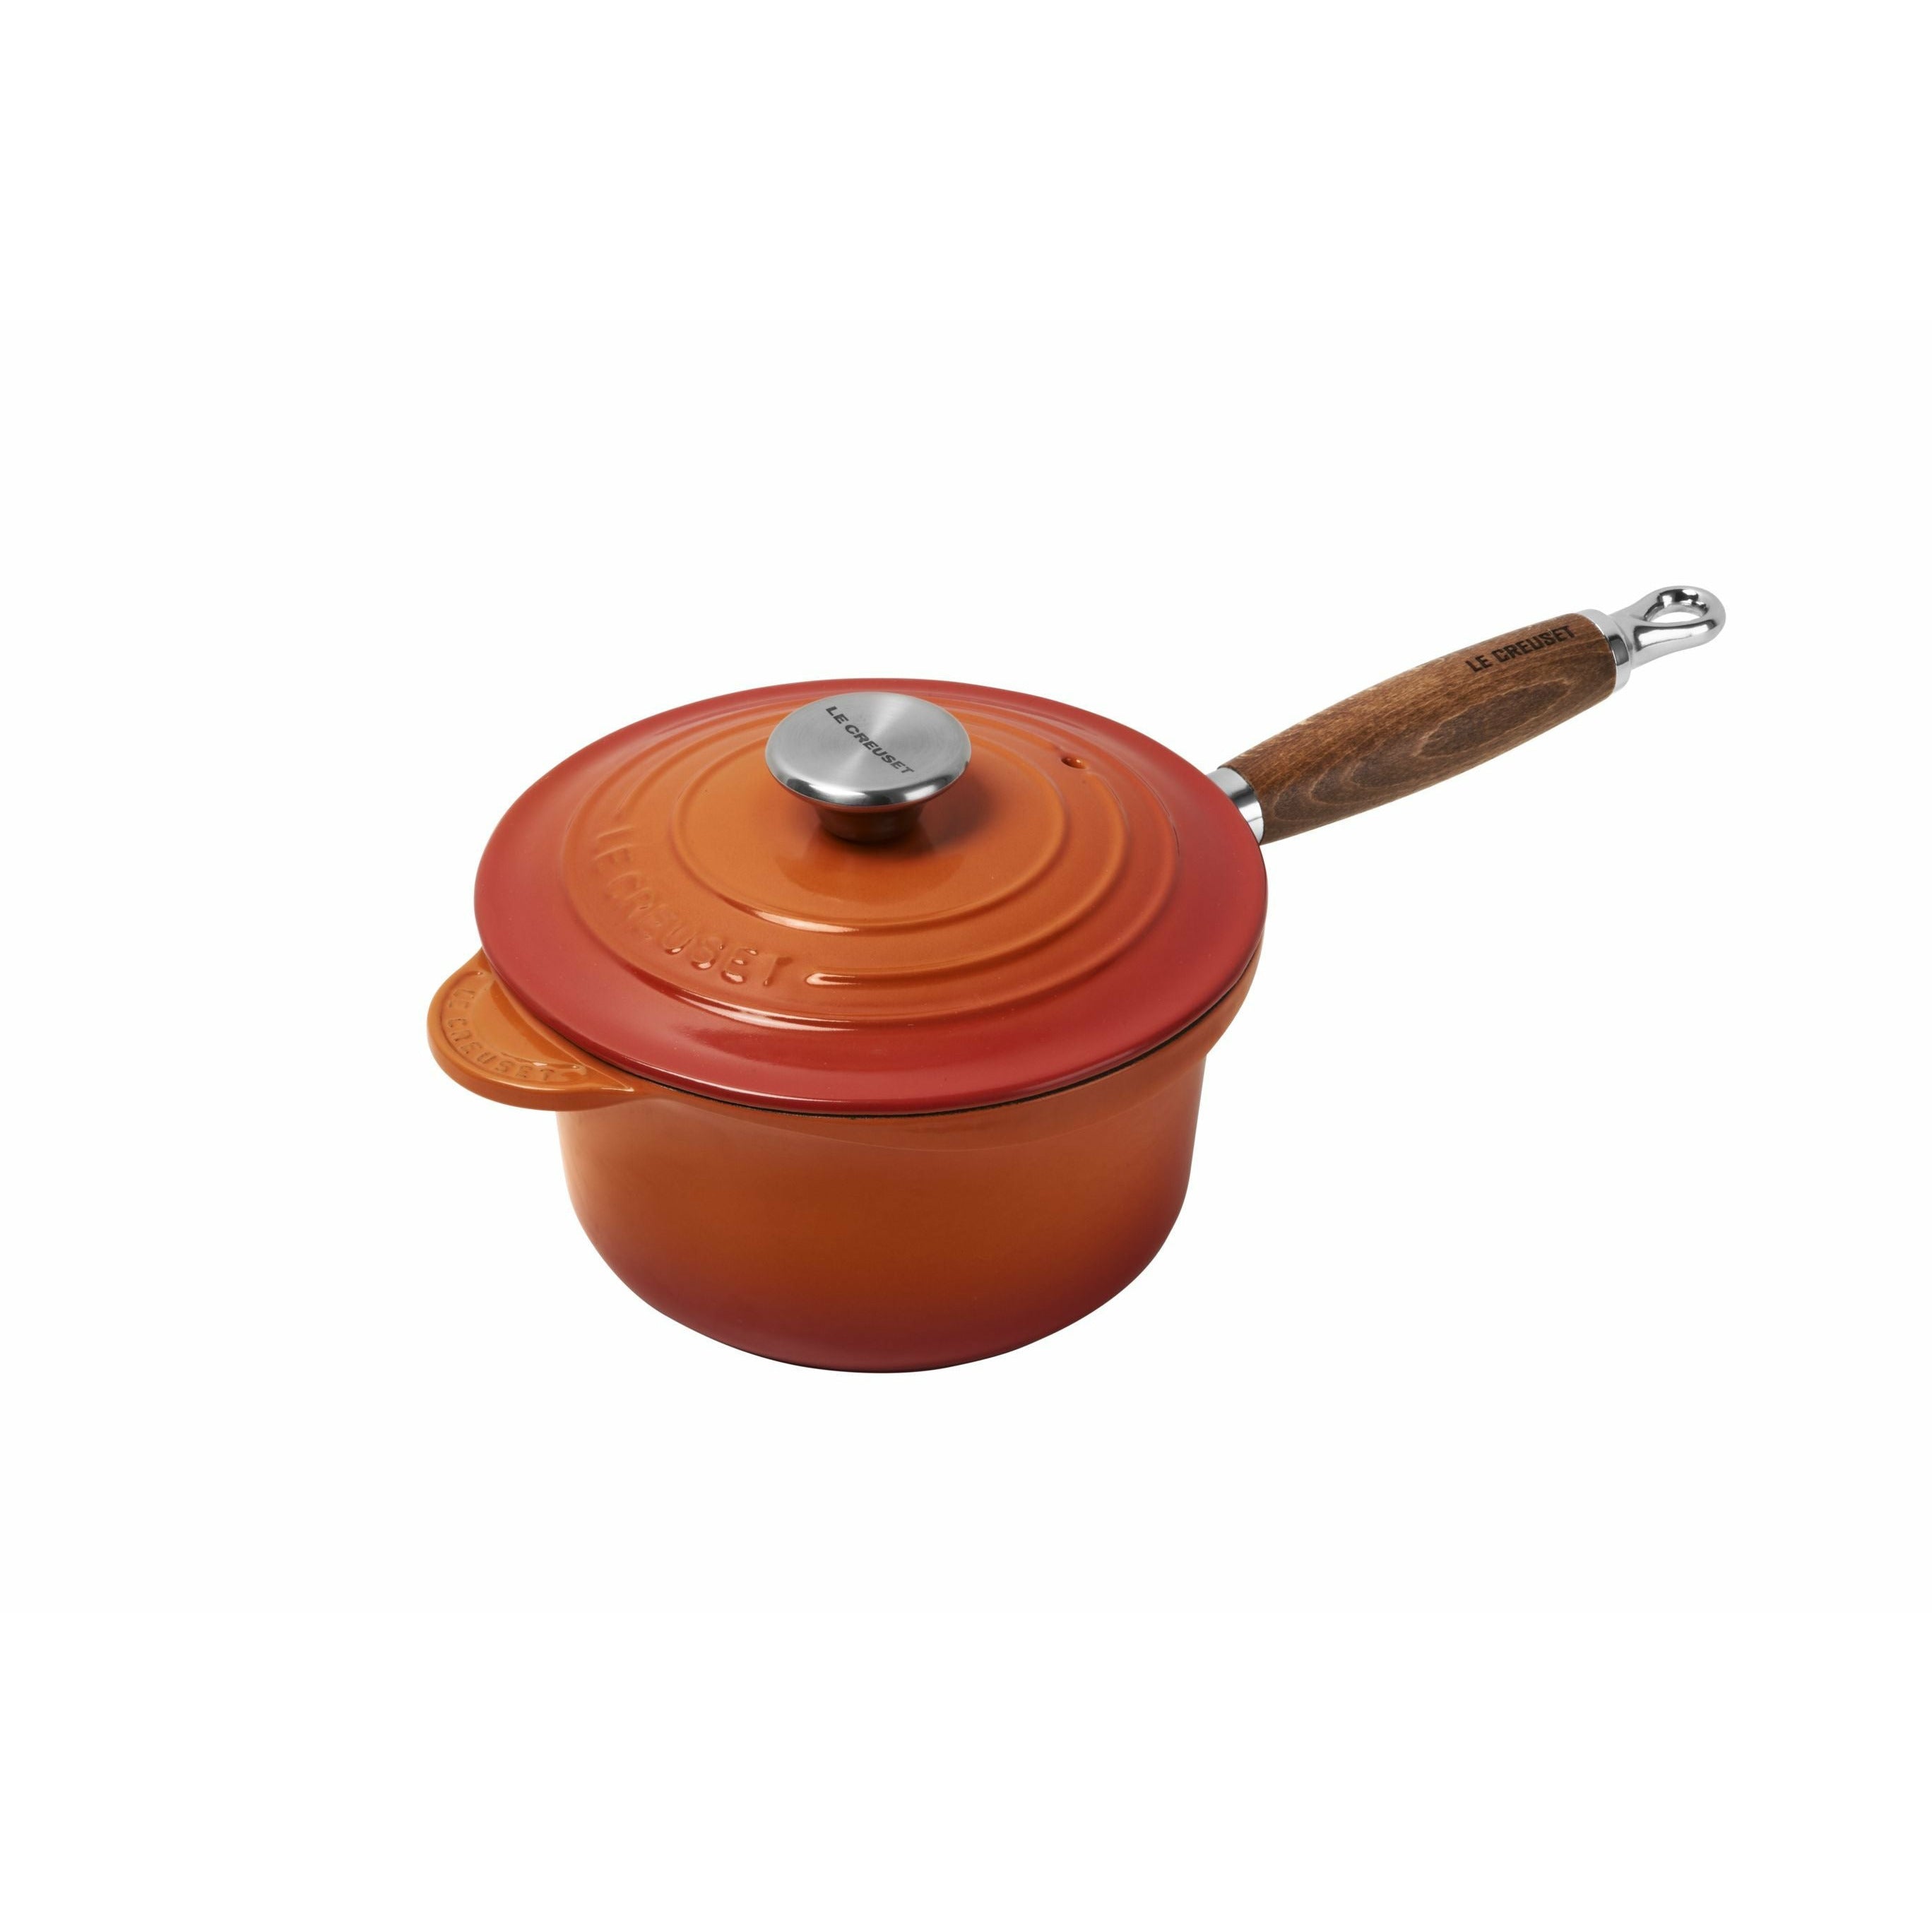 Le Creuset Tradition Professional Topf mit Holzgriff 18 Cm, Ofen rot